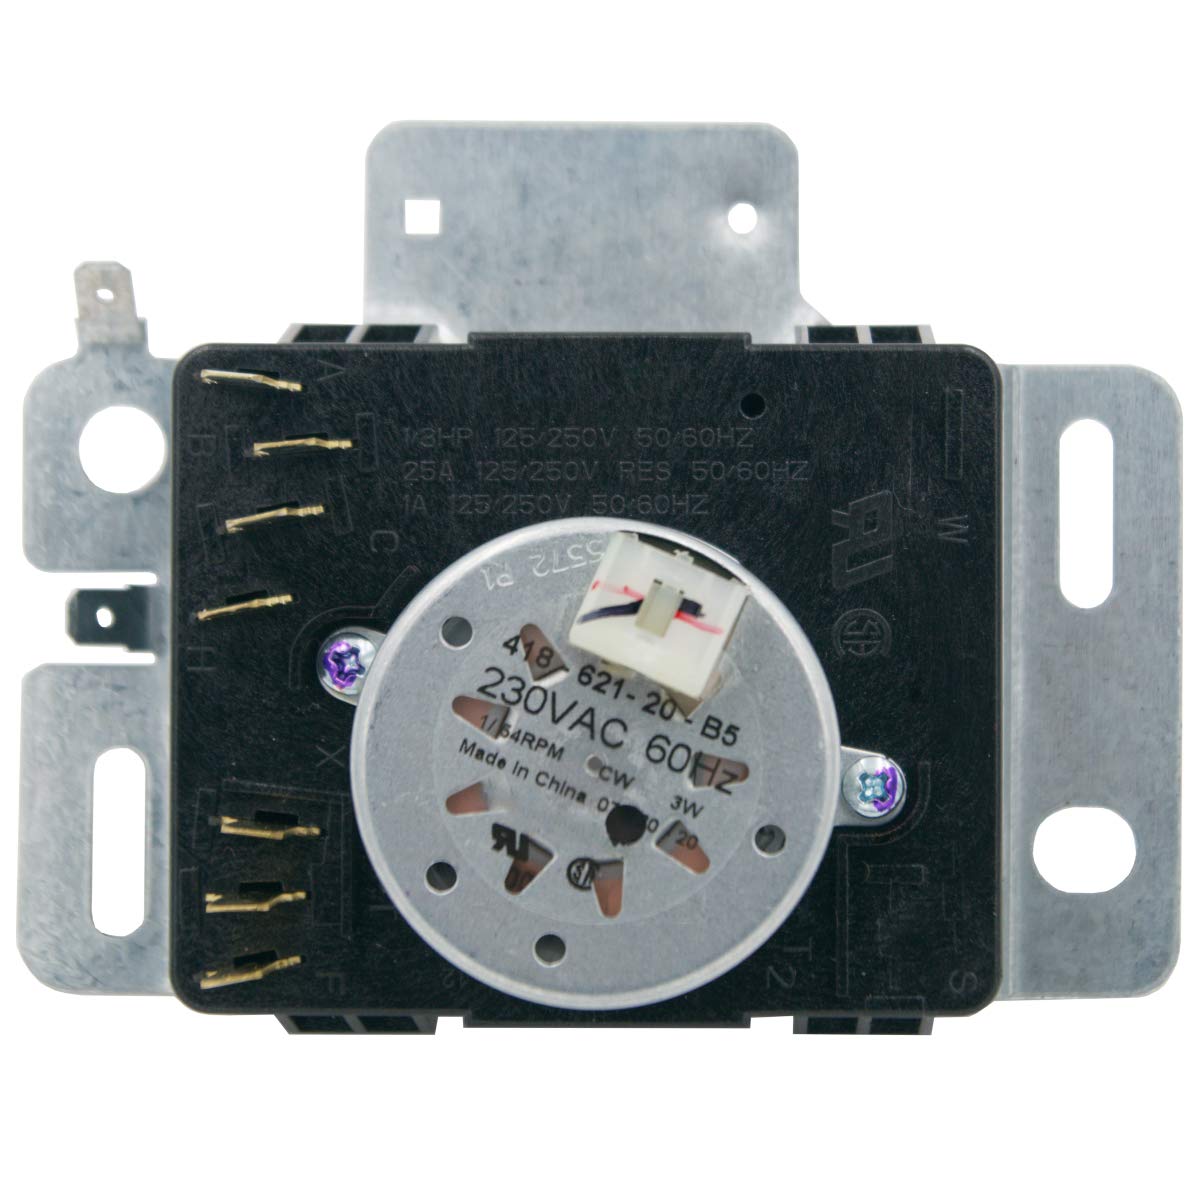 Supplying Demand W10745655 W10857612 clothes Dryer Timer control 230VAc 60Hz Replacement Model Specific Not Universal